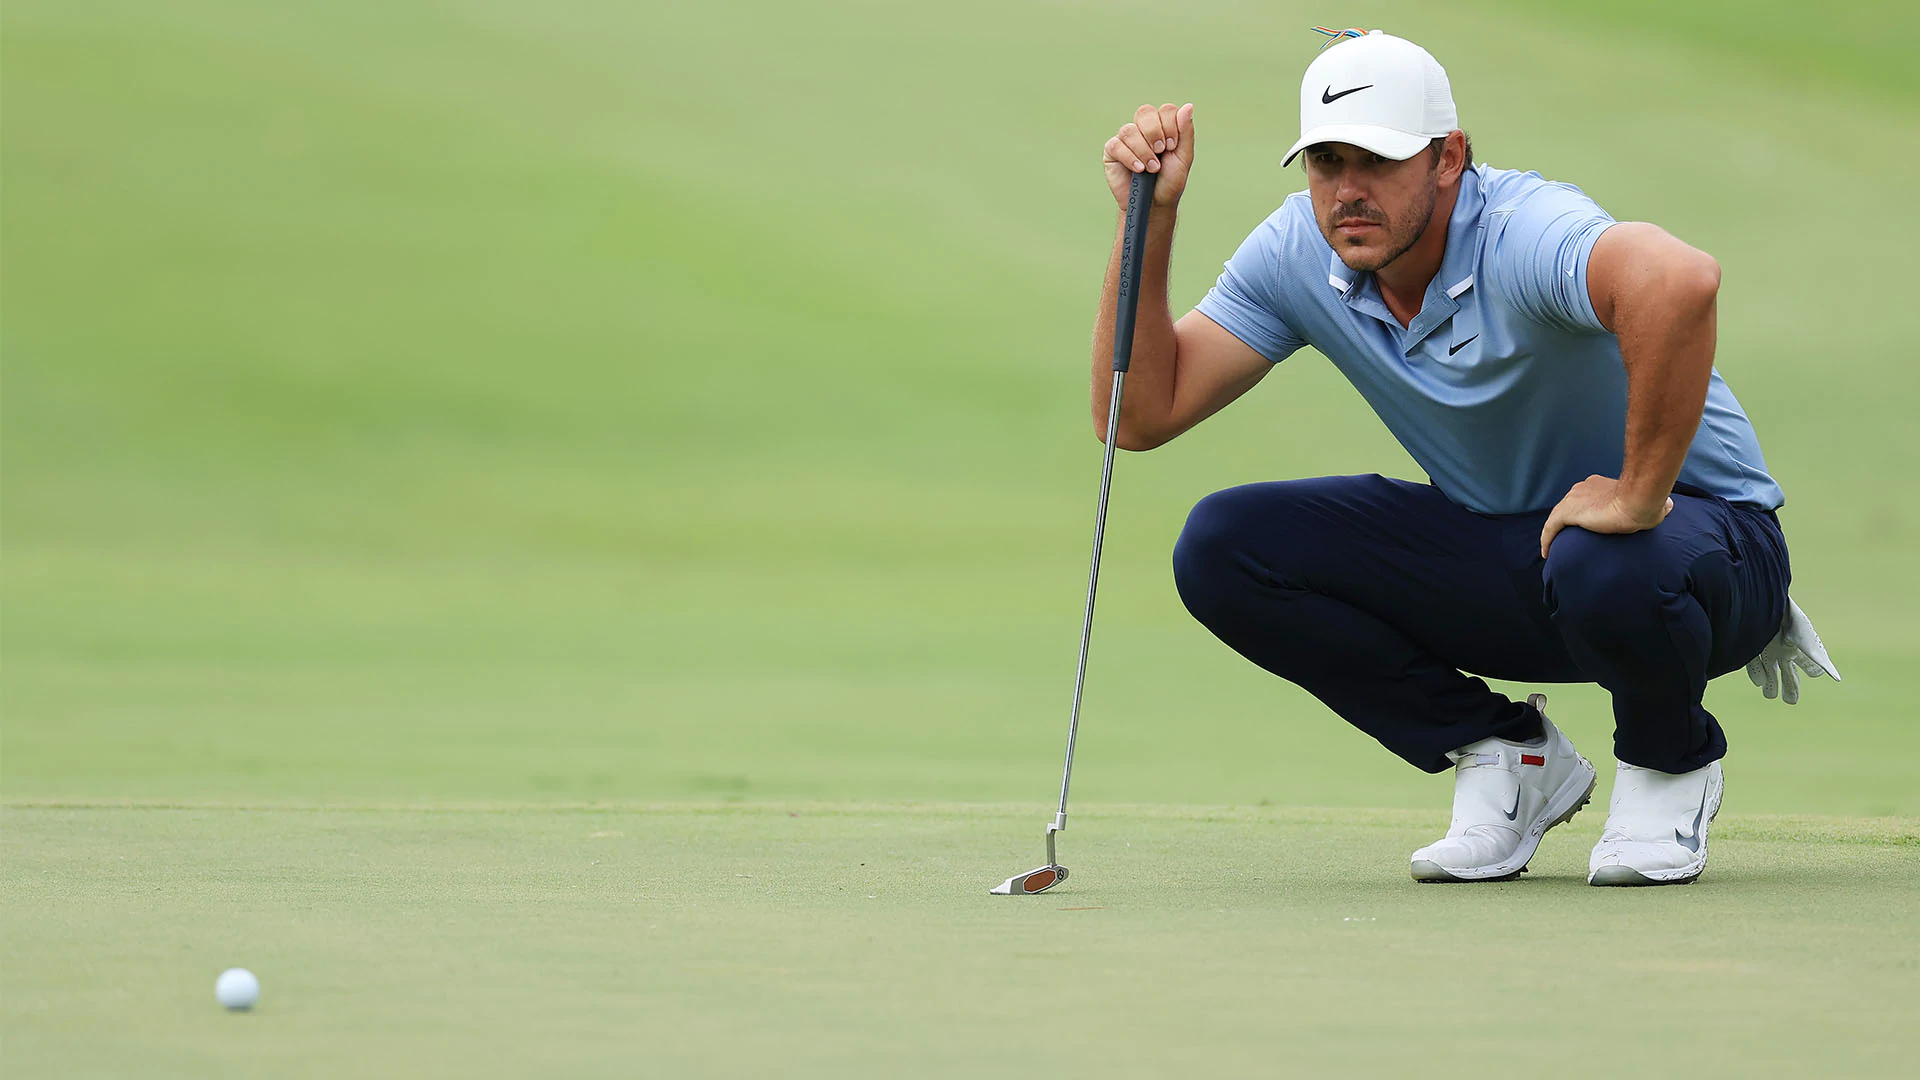 Brooks Koepka (68) still in hunt in Memphis after putting alignment fix